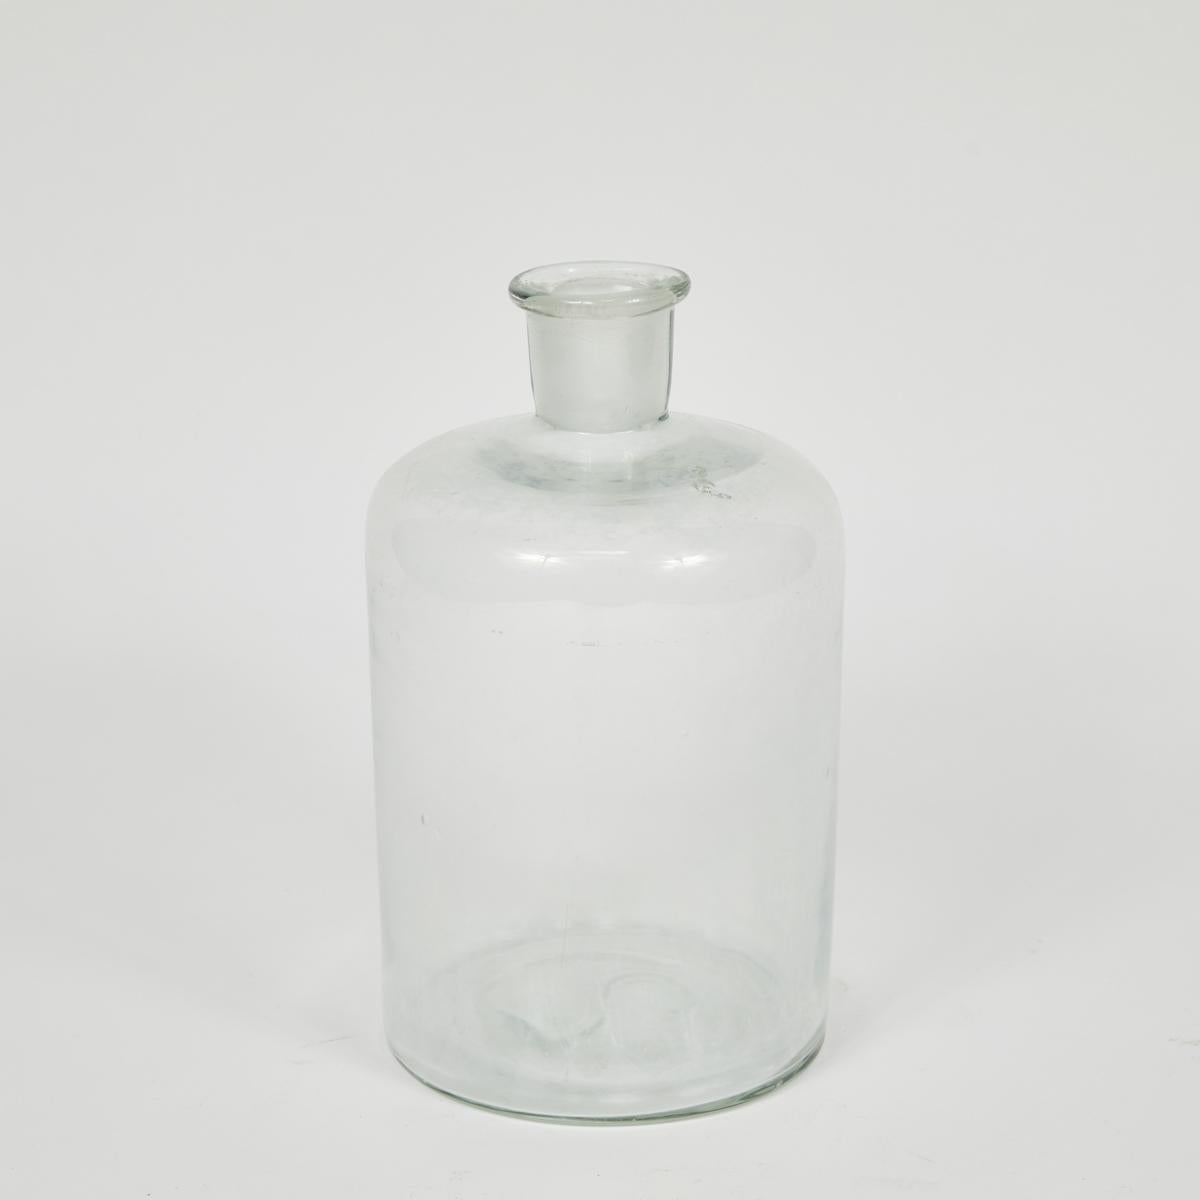 English mid-century clear glass bottles in graduated sizes with round matching glass stoppers. The bottles are satisfyingly heavy, with a beautiful rustic quality to the glass. They could work as vases or as a decorative addition to a cabinet or